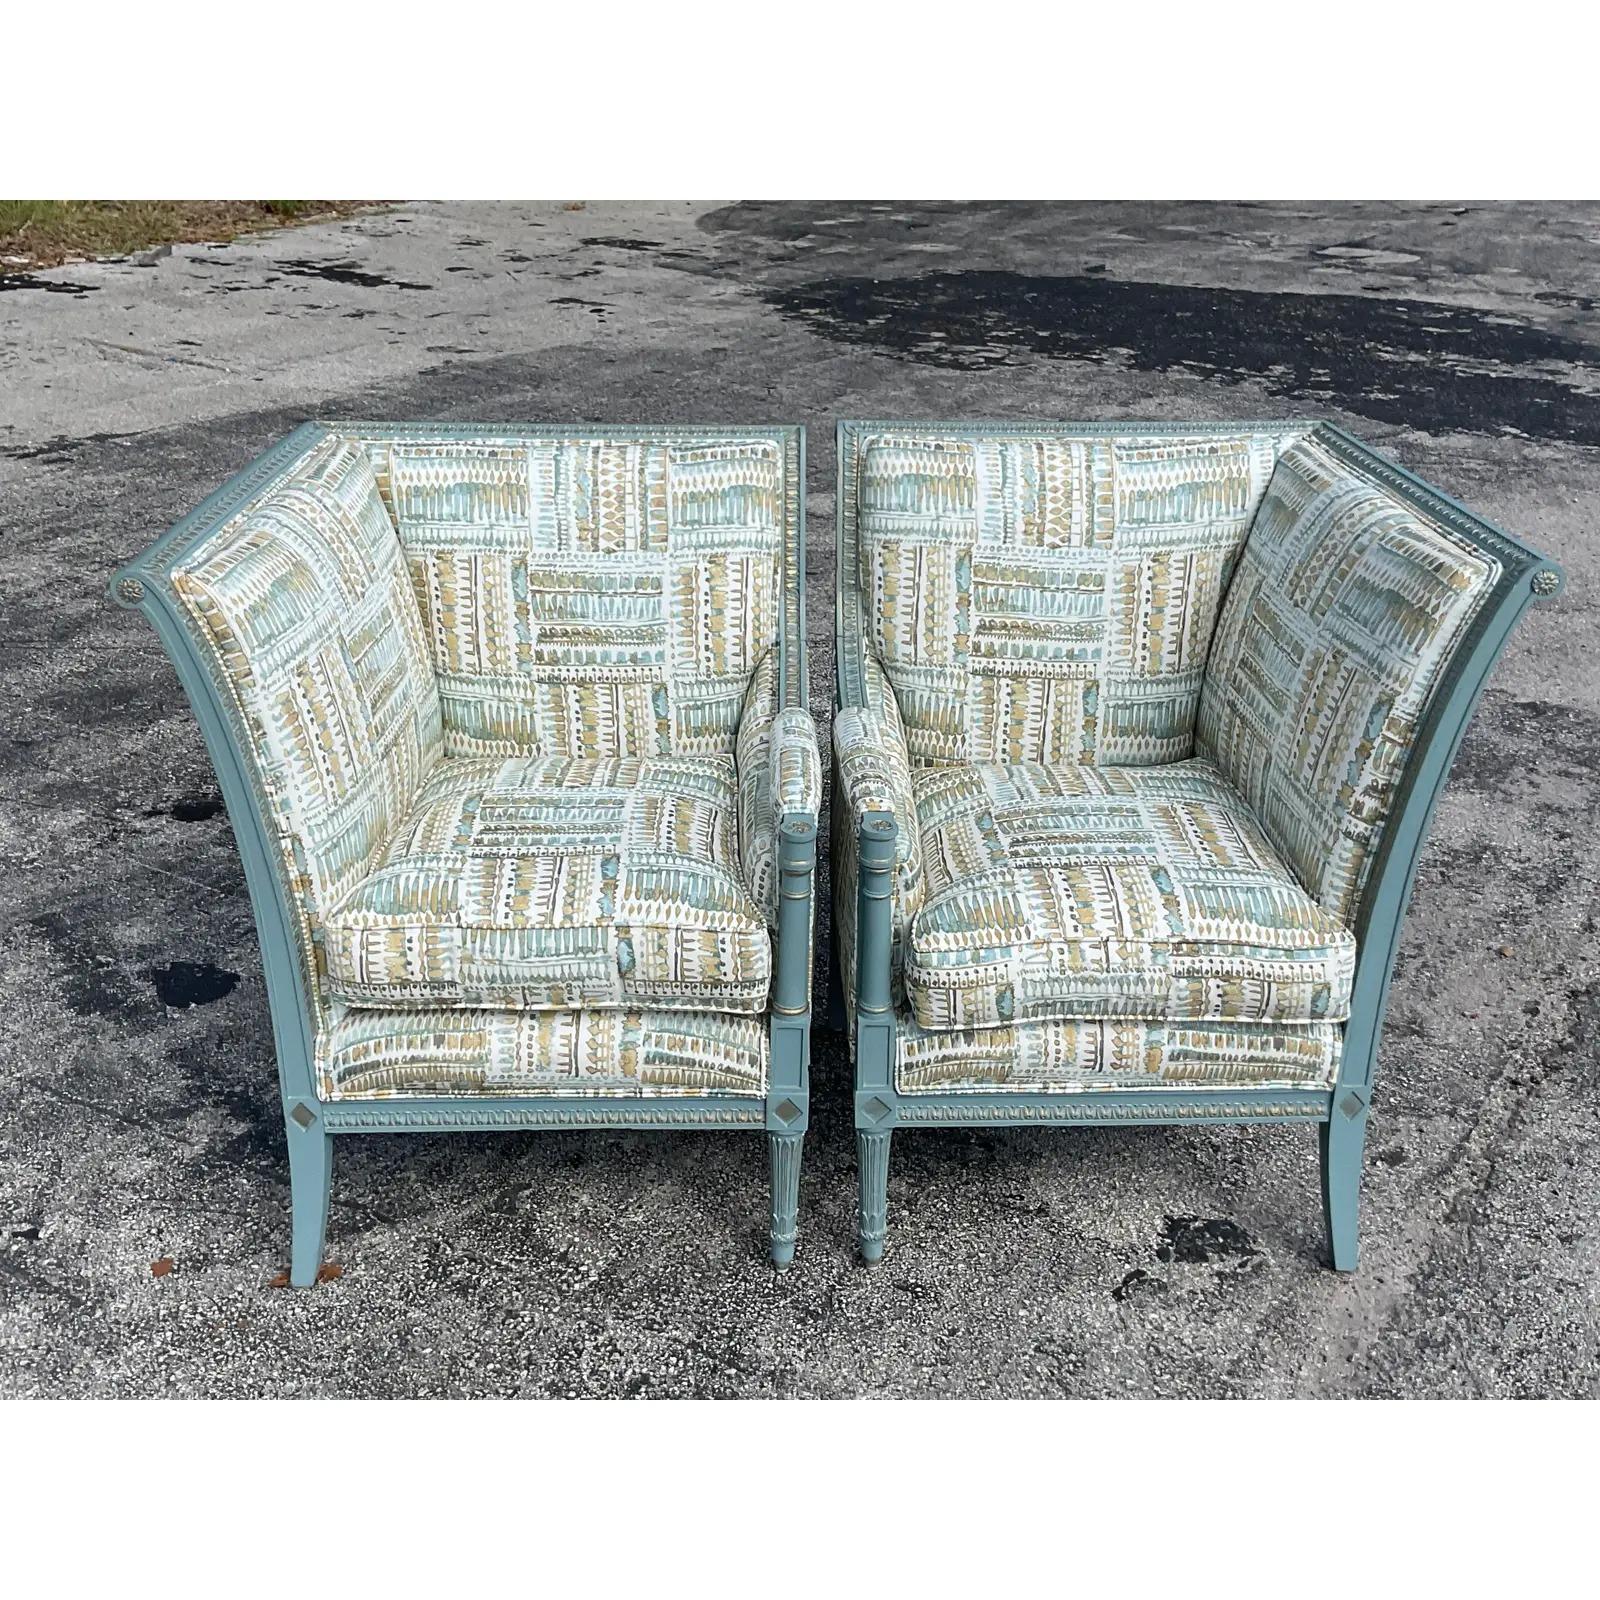 A fantastic pair of regency high back chairs. The pieces are placed together to make a chic little loveseat. Painted wood in the most charming robins Gregg blue with gilt touches. A chic patchwork print on a polished cotton. Down filled seats.